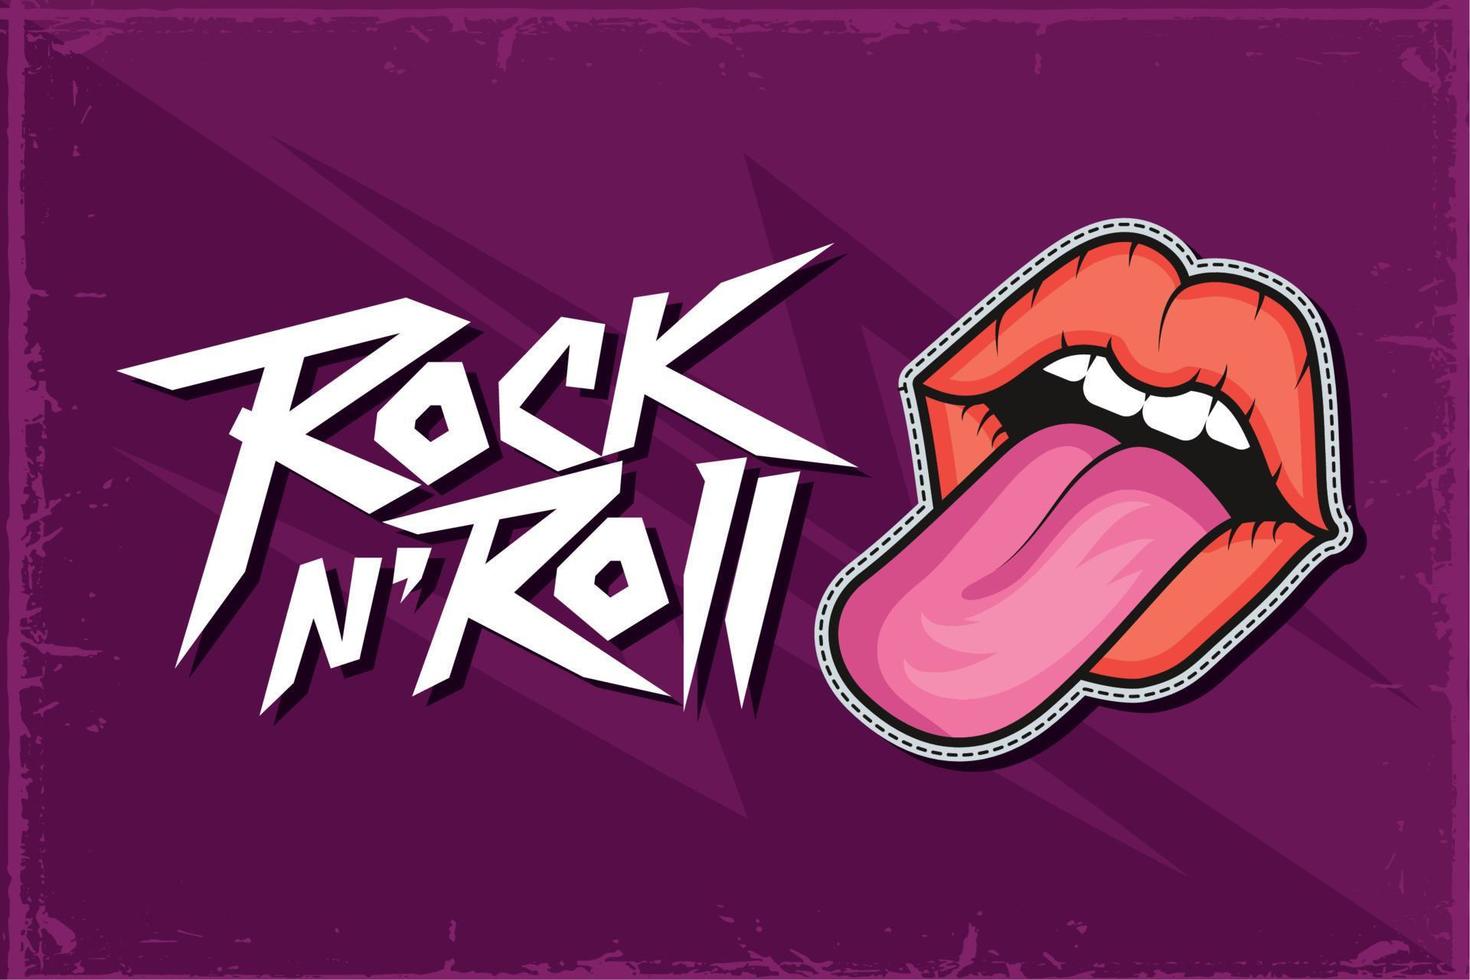 mouth patch in rock poster vector